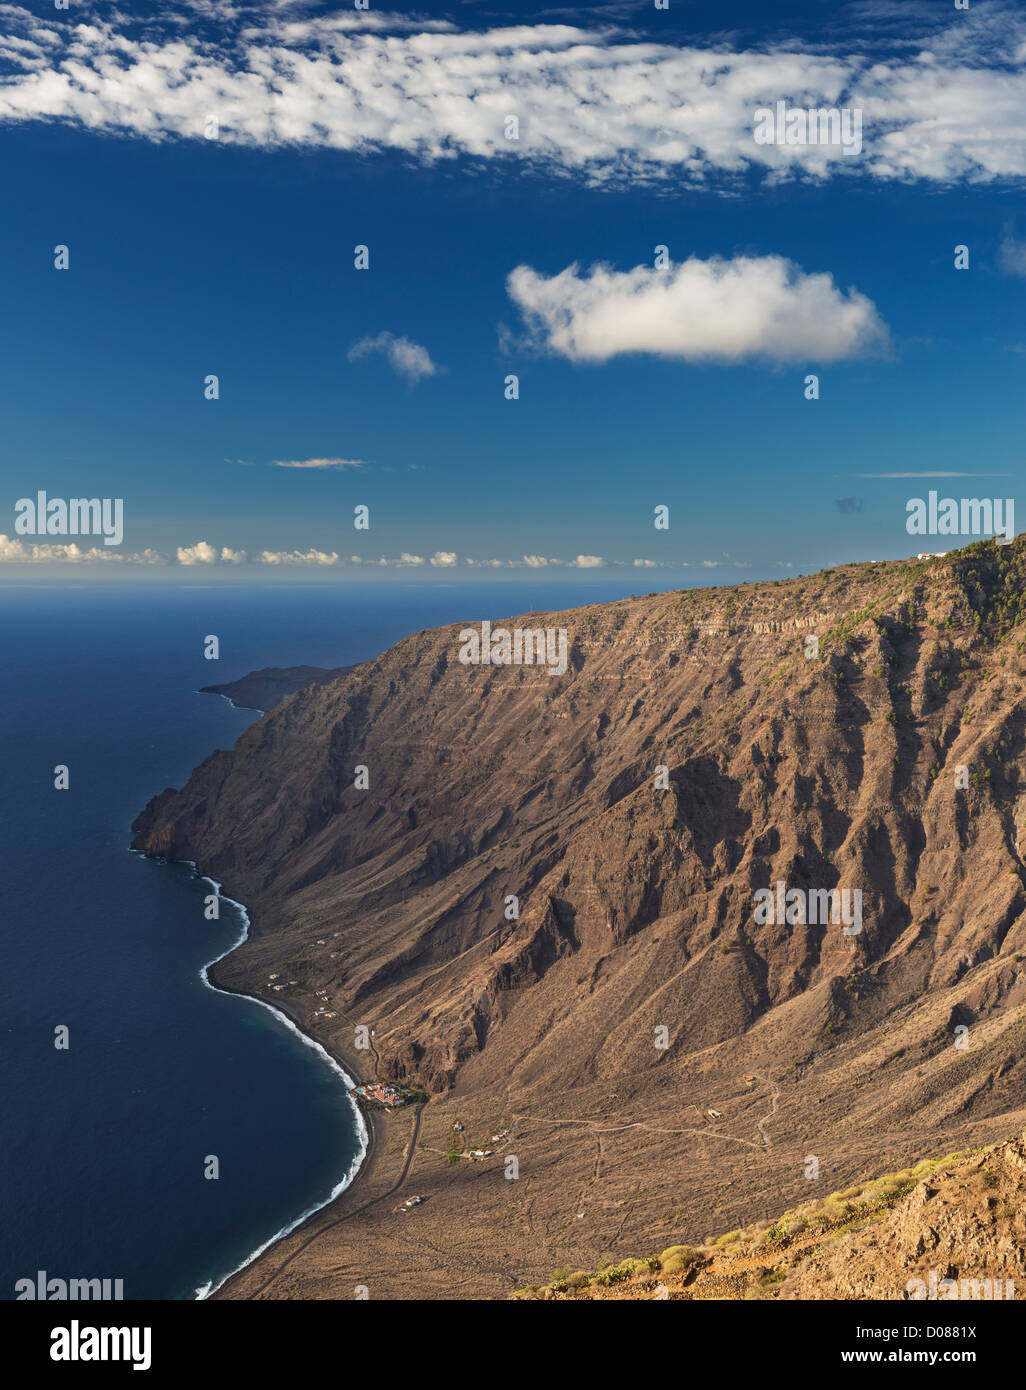 View from the cliff-top Mirador de Isora, El Hierro, Canary Islands, Spain. The largest building visible is the Parador Hotel Stock Photo